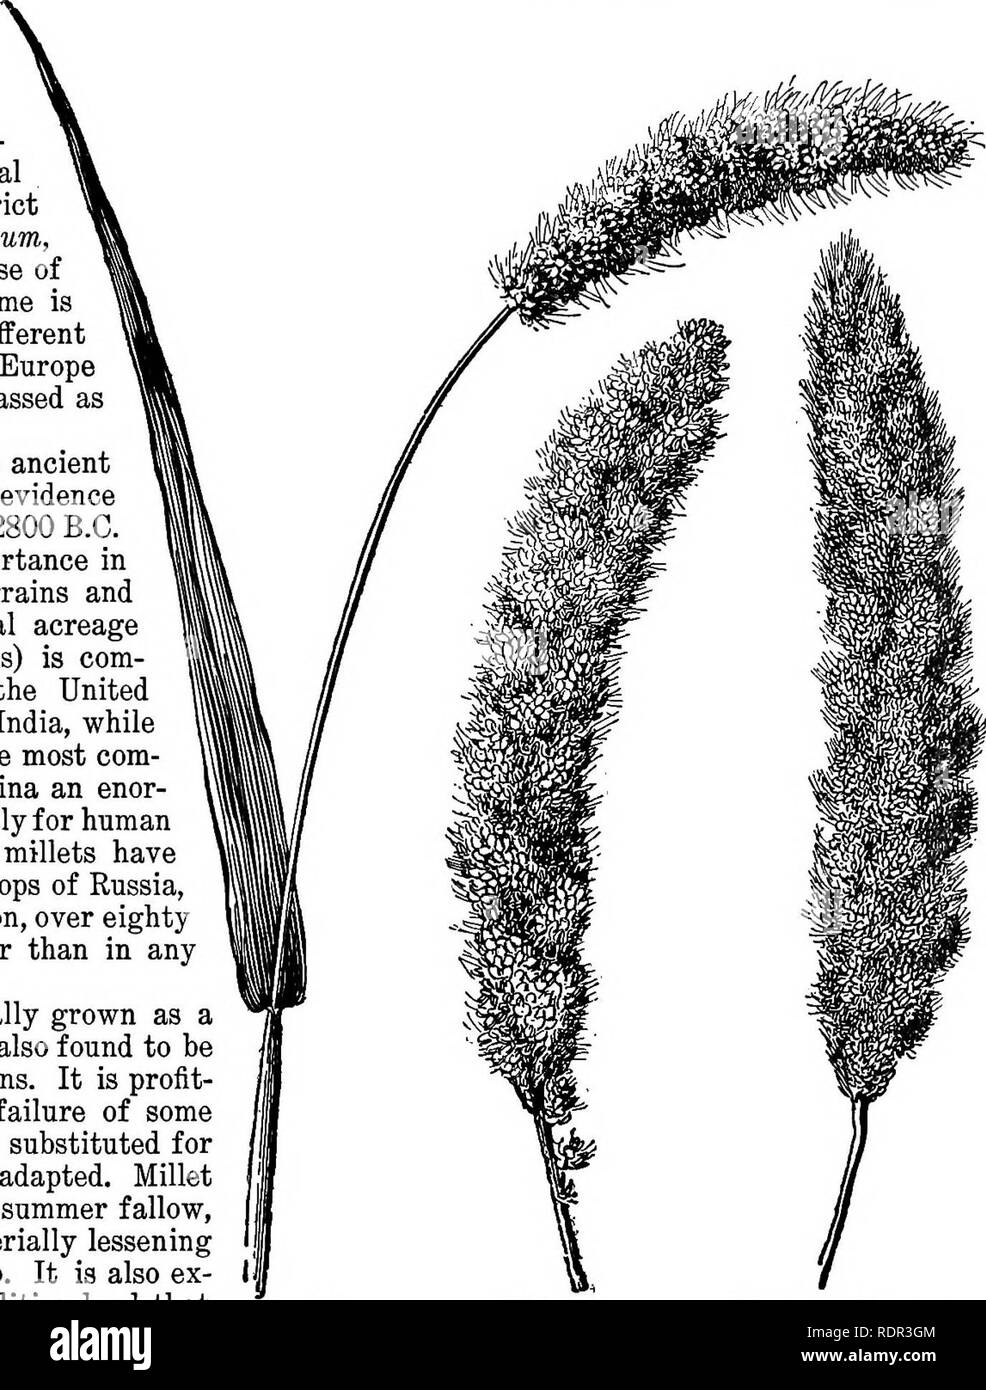 . Cyclopedia of farm crops, a popular survey of crops and crop-making methods in the United States and Canada;. Farm produce; Agriculture. MILLETS MILLETS. Pigs. 693-702. By M. A. Carleton.   The millets are cultivated varie- ties of certain small-seeded cereal and forage grasses, which, in a strict sense, belong to the genus Panicum, or to closely allied genera. Because of a resemblance in the seed the name is also applied to other grasses of different genera in this country, while in Europe and Asia even the sorghums are classed as millets. The millets are among the most ancient of food grai Stock Photo